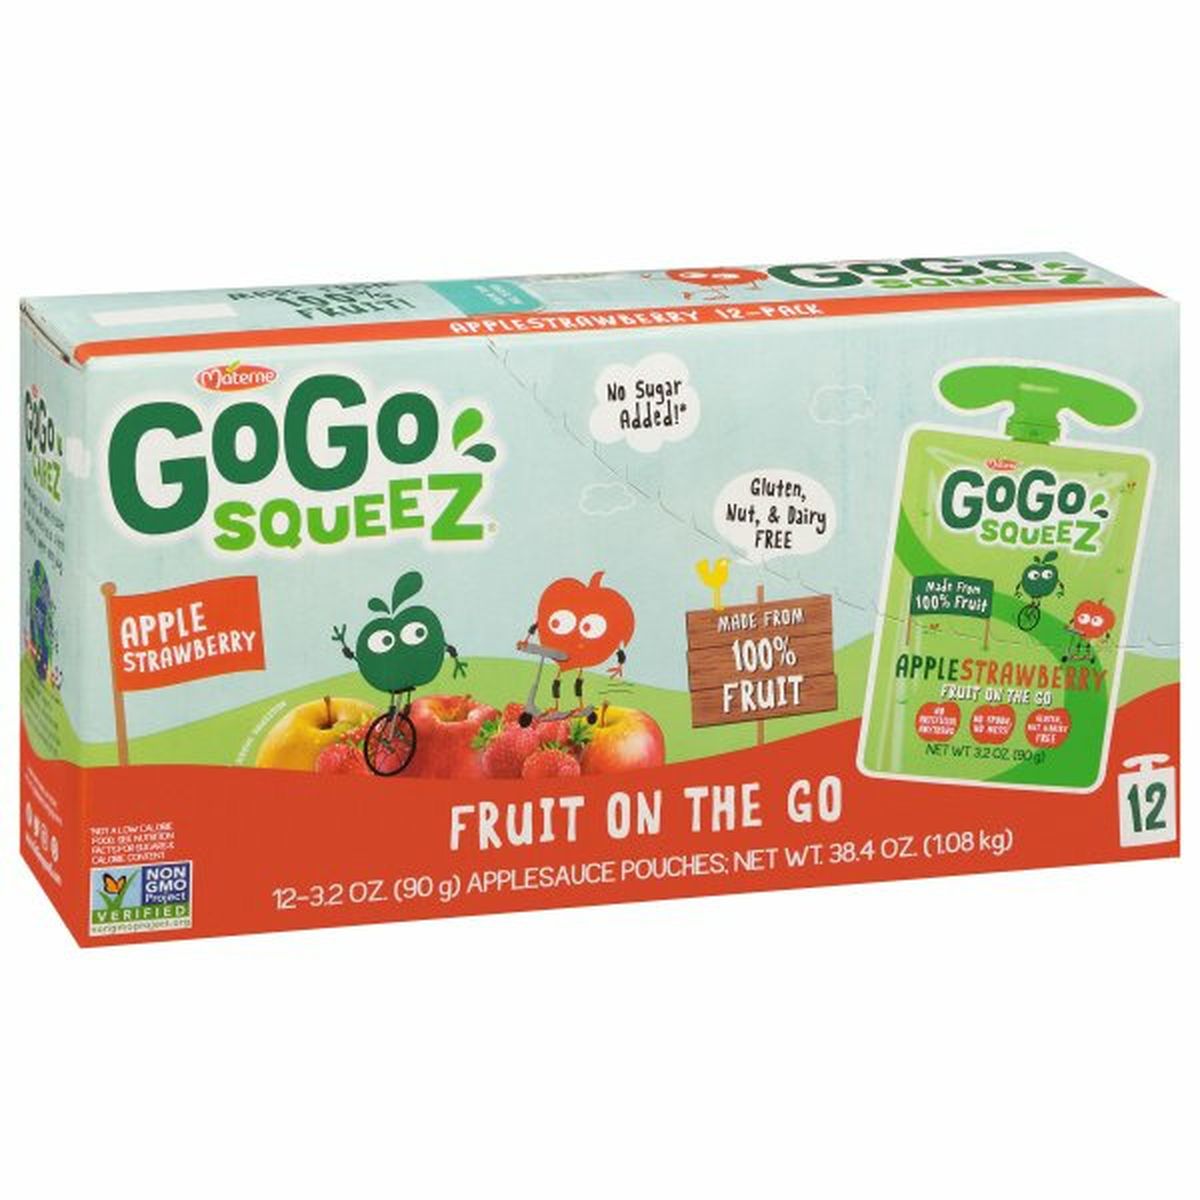 Calories in GoGo Squeez Applesauce, Apple Strawberry, Fruit on the Go